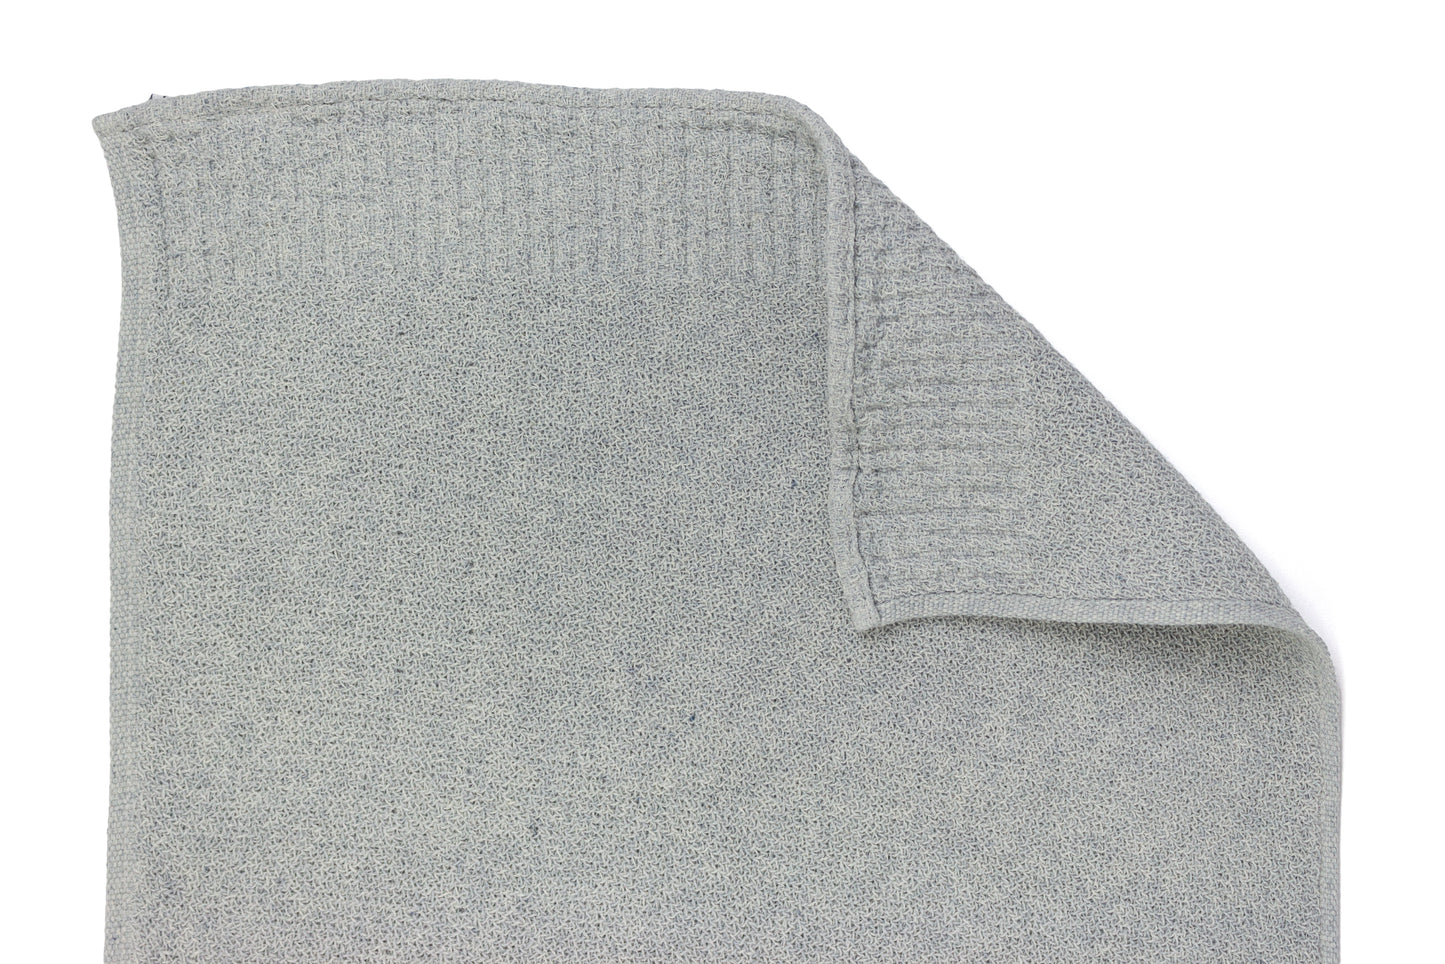 Re.Lana blue grey - Recycled Cotton Towel